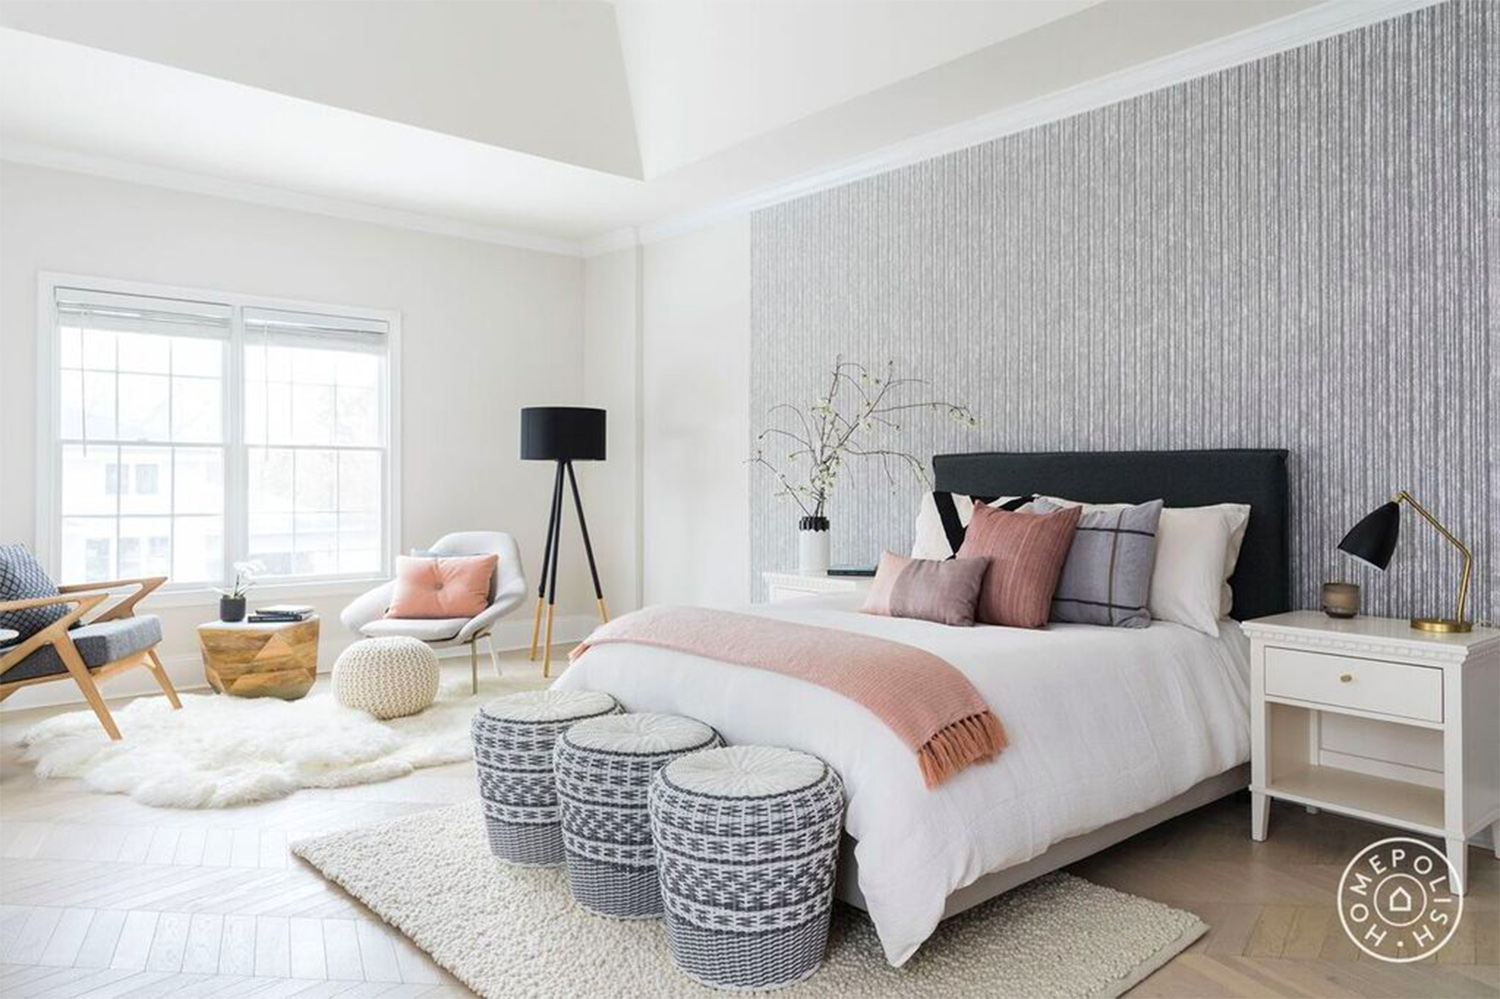 PHOTO: Johnny Earle and Katie Freketic combined their design styles in their bedroom.